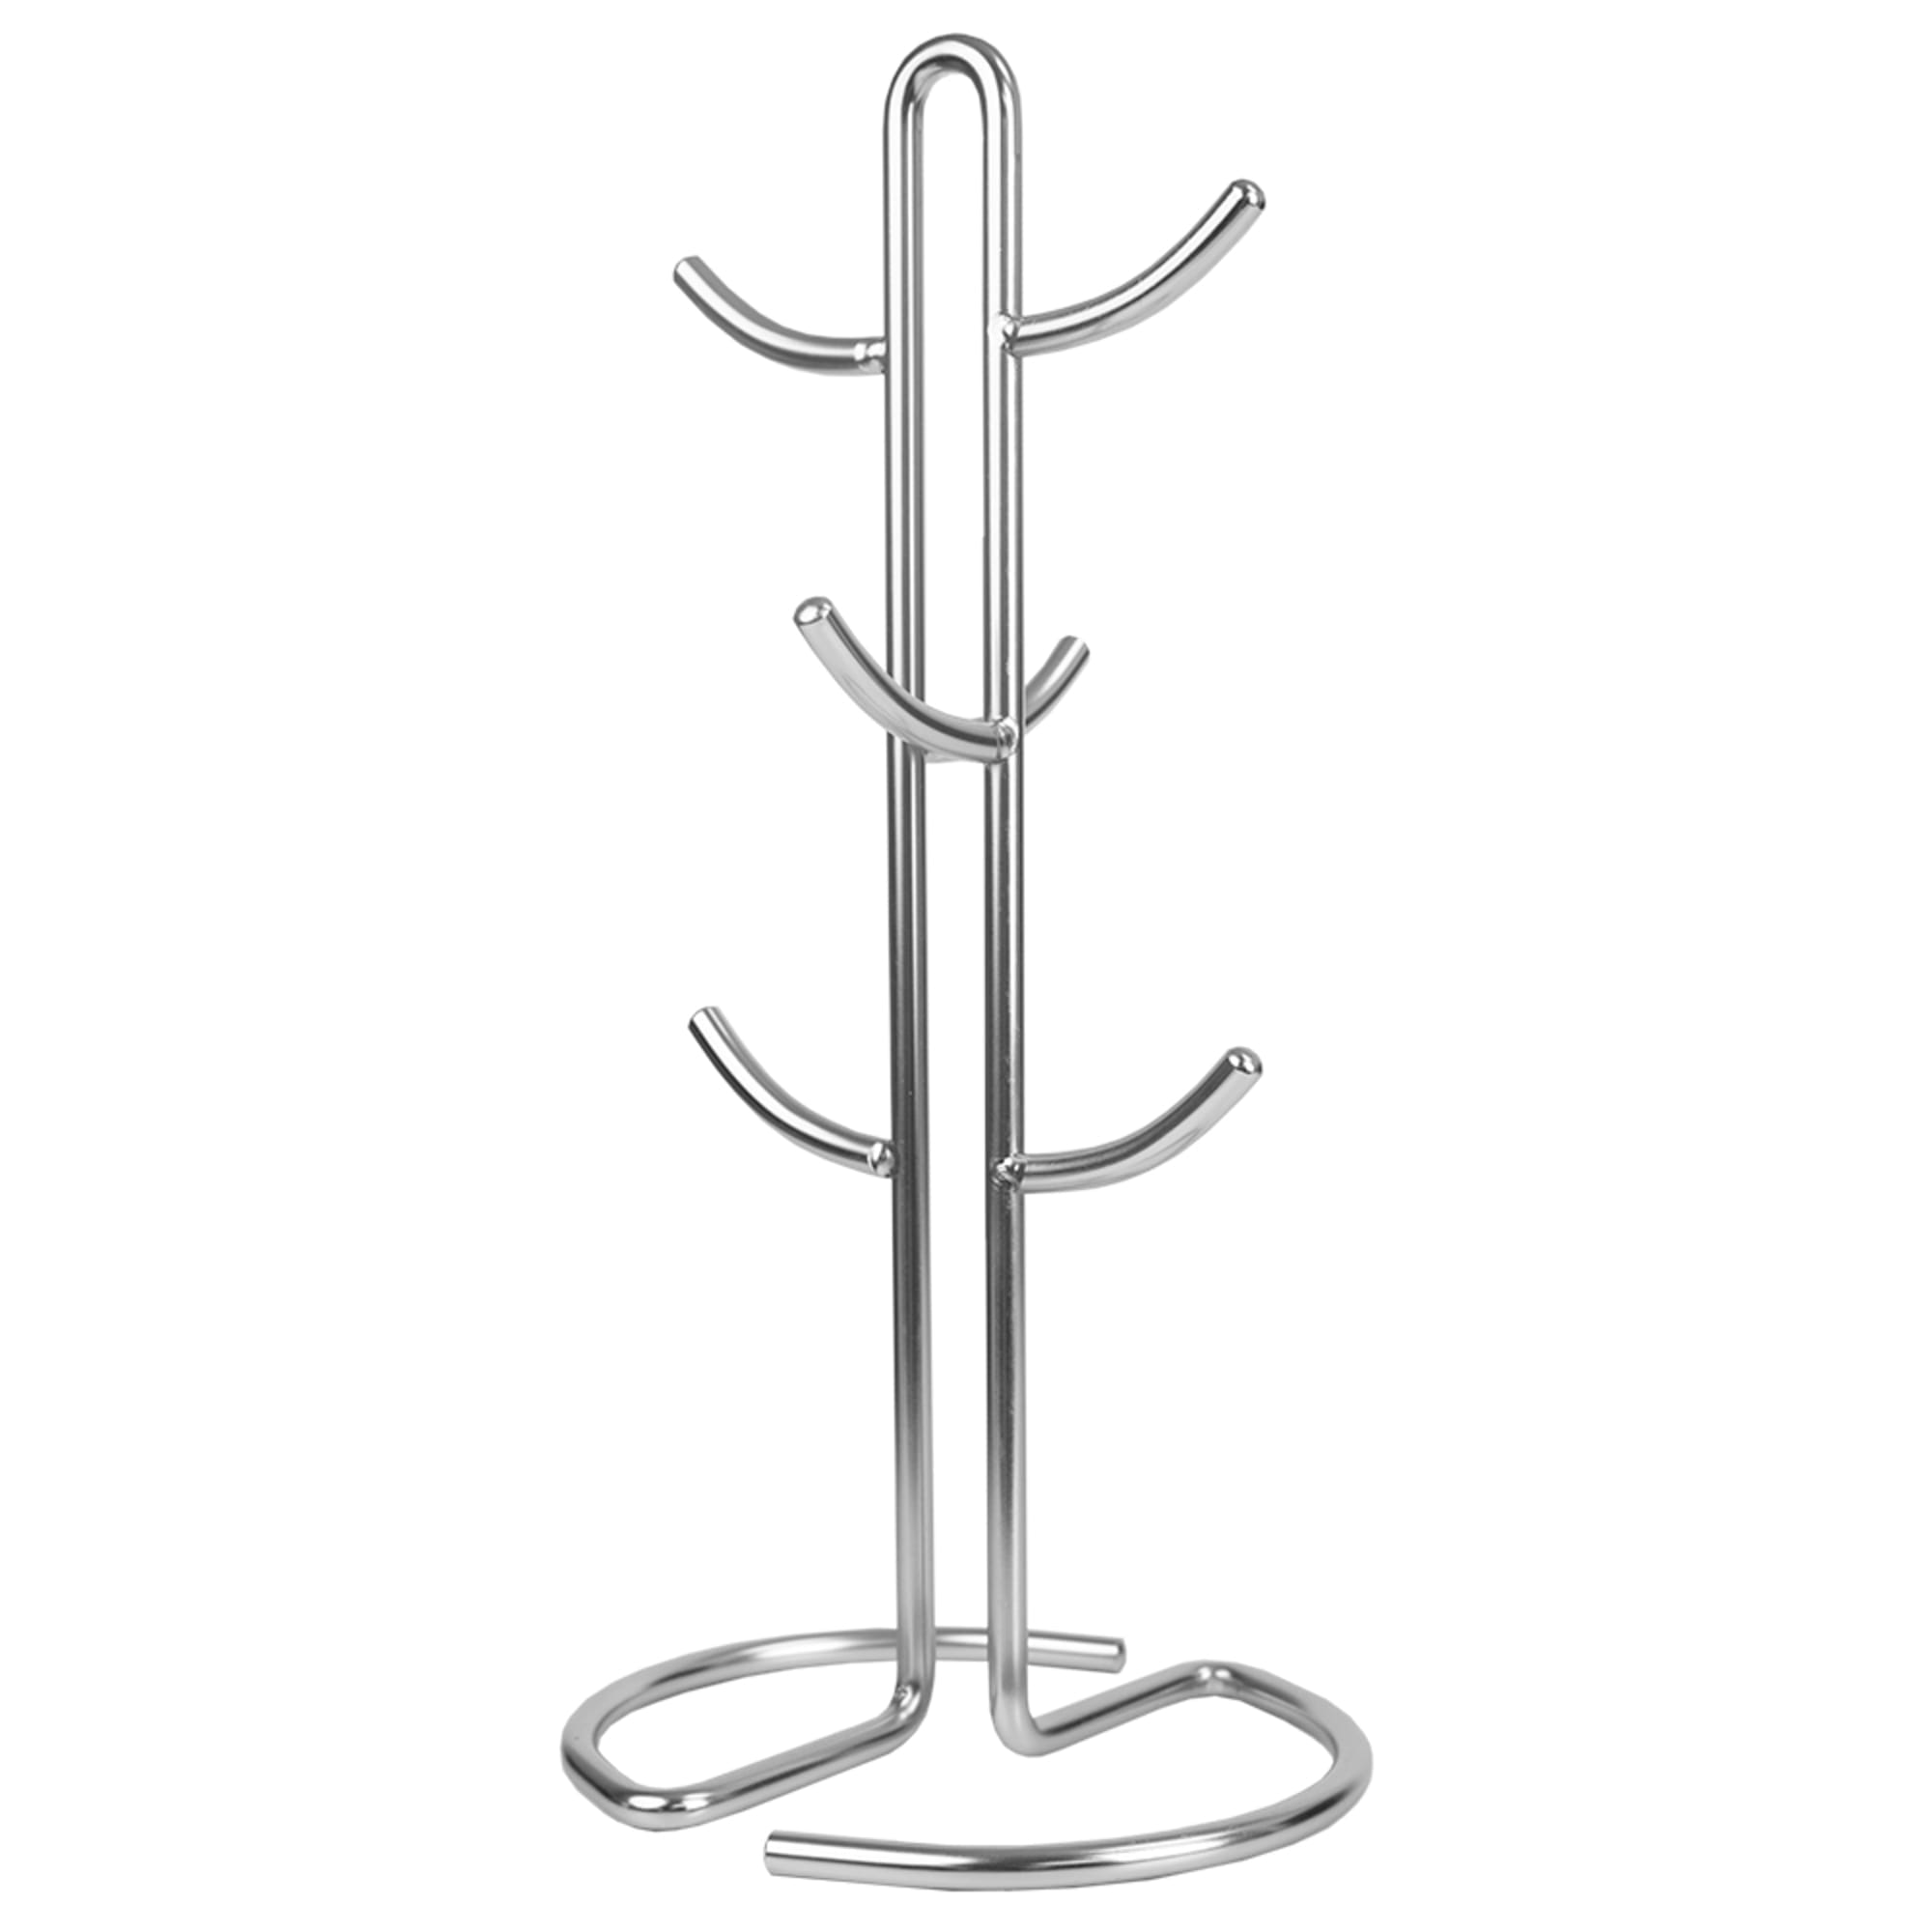 Home Basics Simplicity Collection 6 Hook Steel Mug Tree, Satin Chrome $15.00 EACH, CASE PACK OF 12